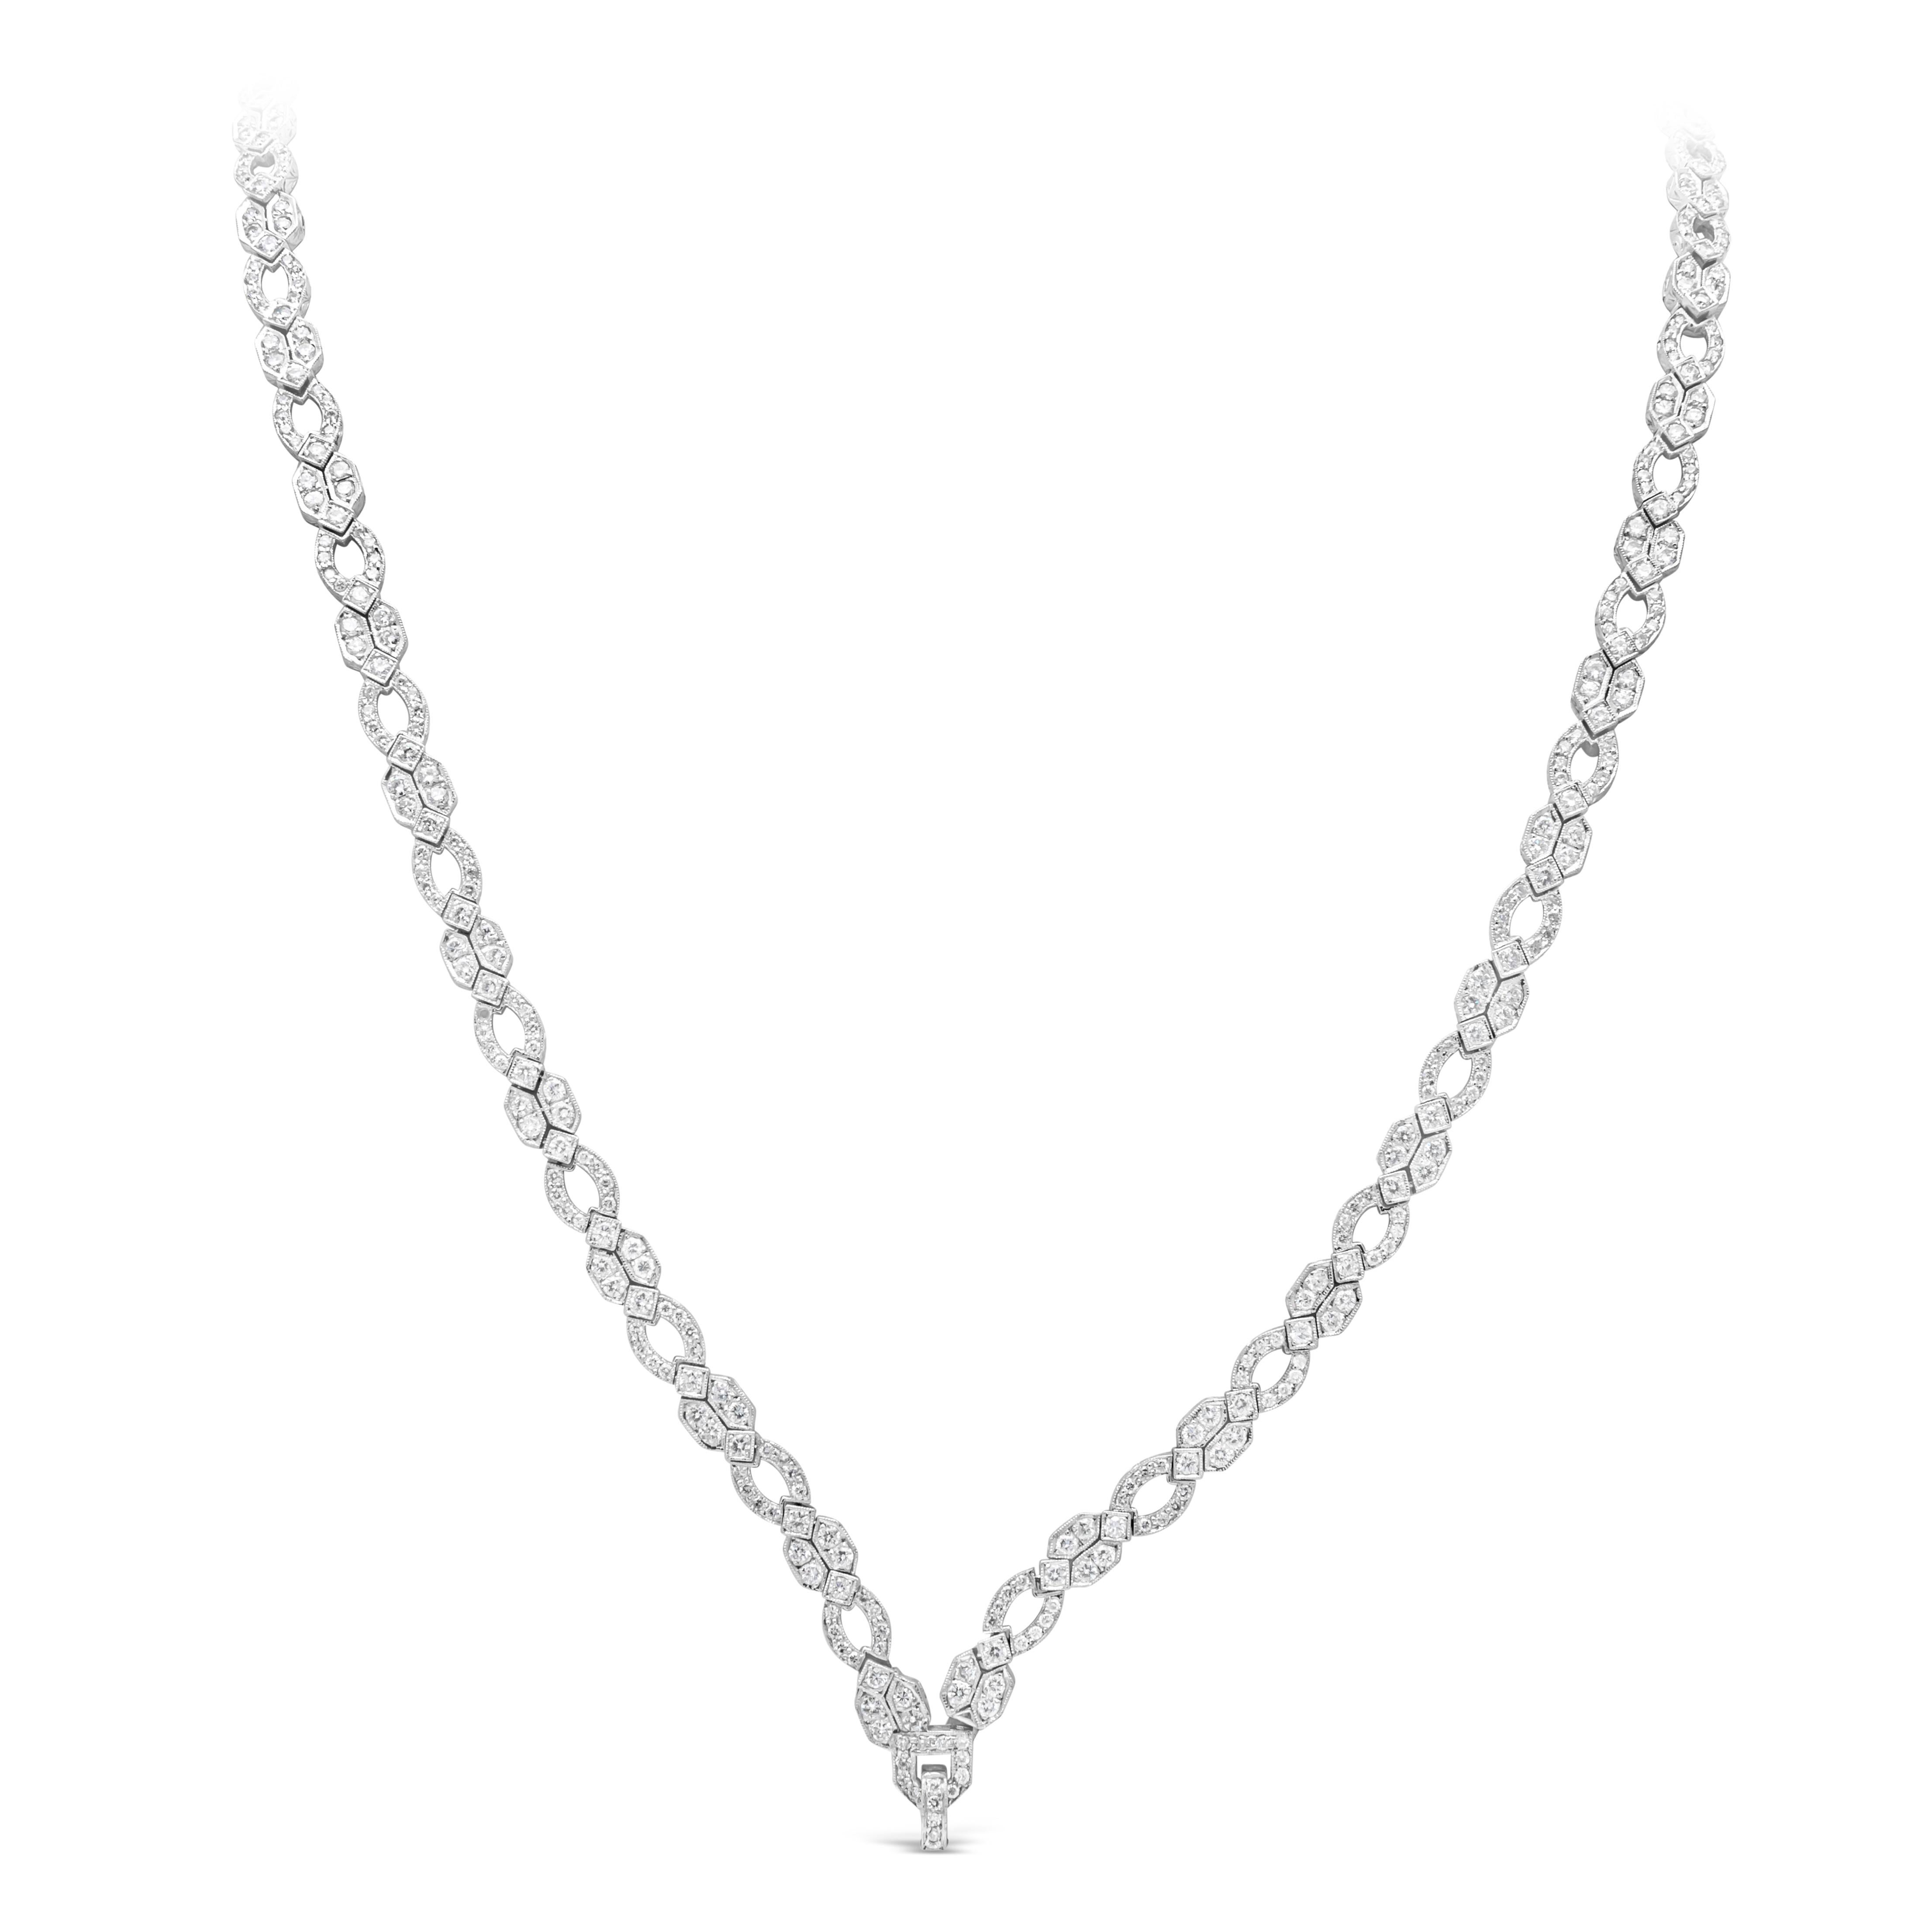 A unique necklace showcasing 20.60 carats of round diamonds, set in an antique-looking design. The necklace is unique and versatile as it can collapse into 4 separate bracelets. Made in polish platinum. Necklace total length is 27 inches.

